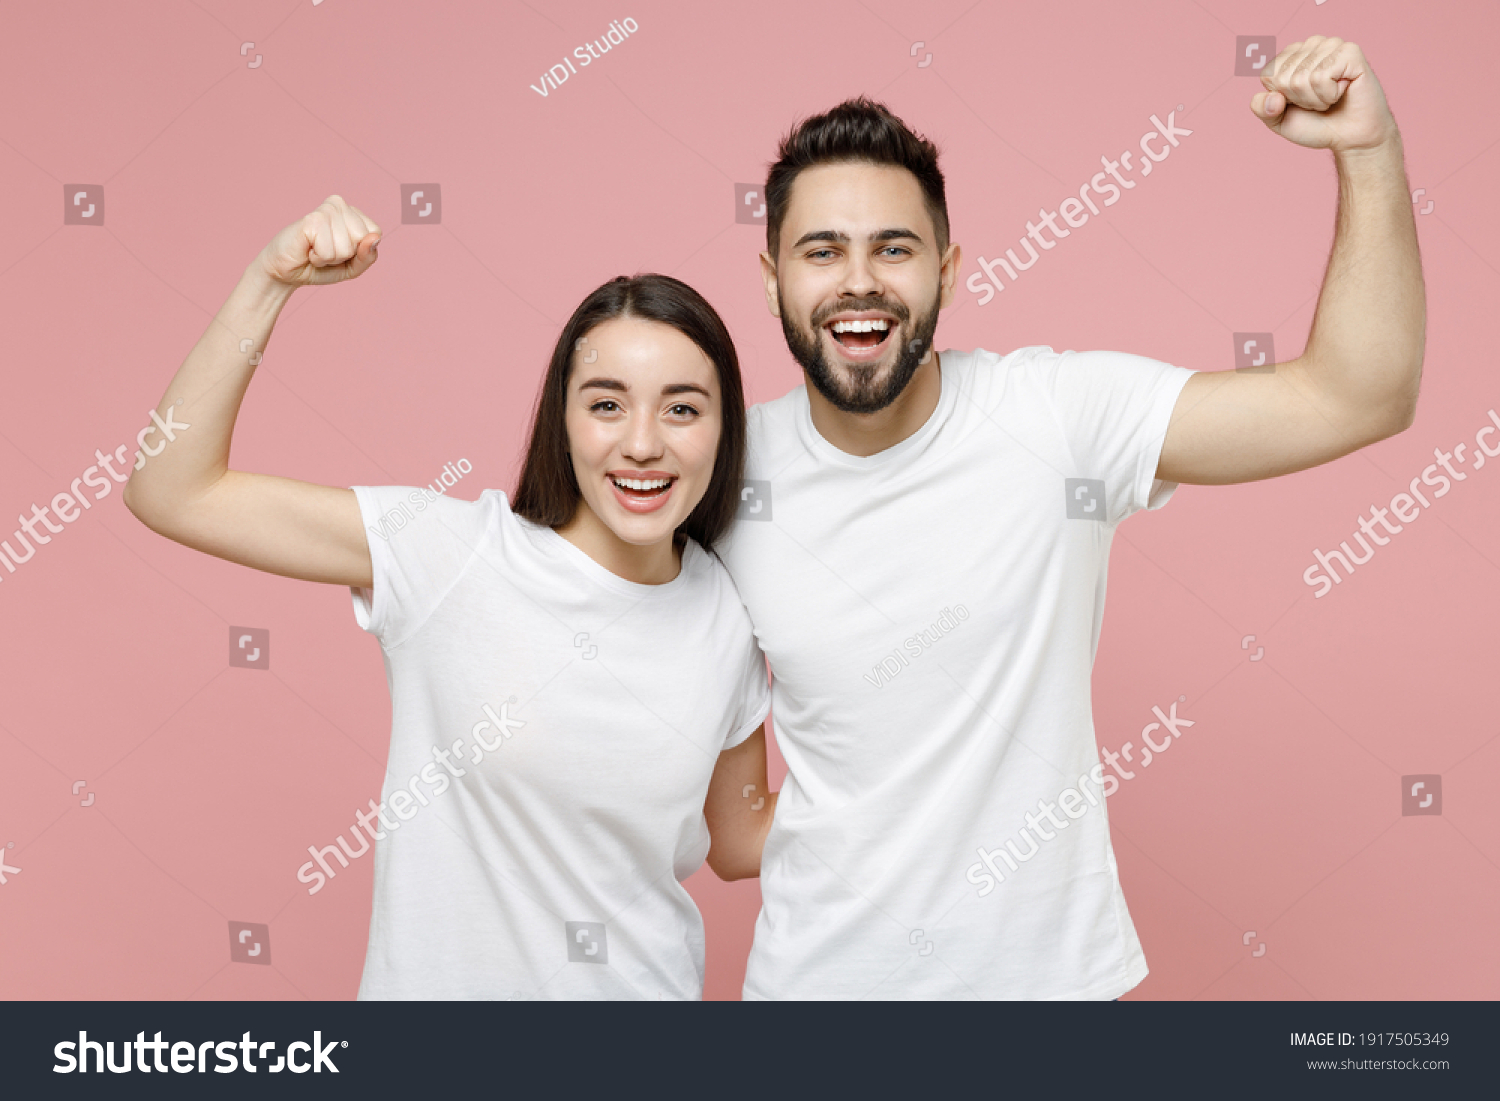 Young cheerful strong sporty fitness couple two friends man woman 20s in white basic blank print design t-shirts showing biceps muscles on hand isolated on pastel pink color background studio portrait #1917505349